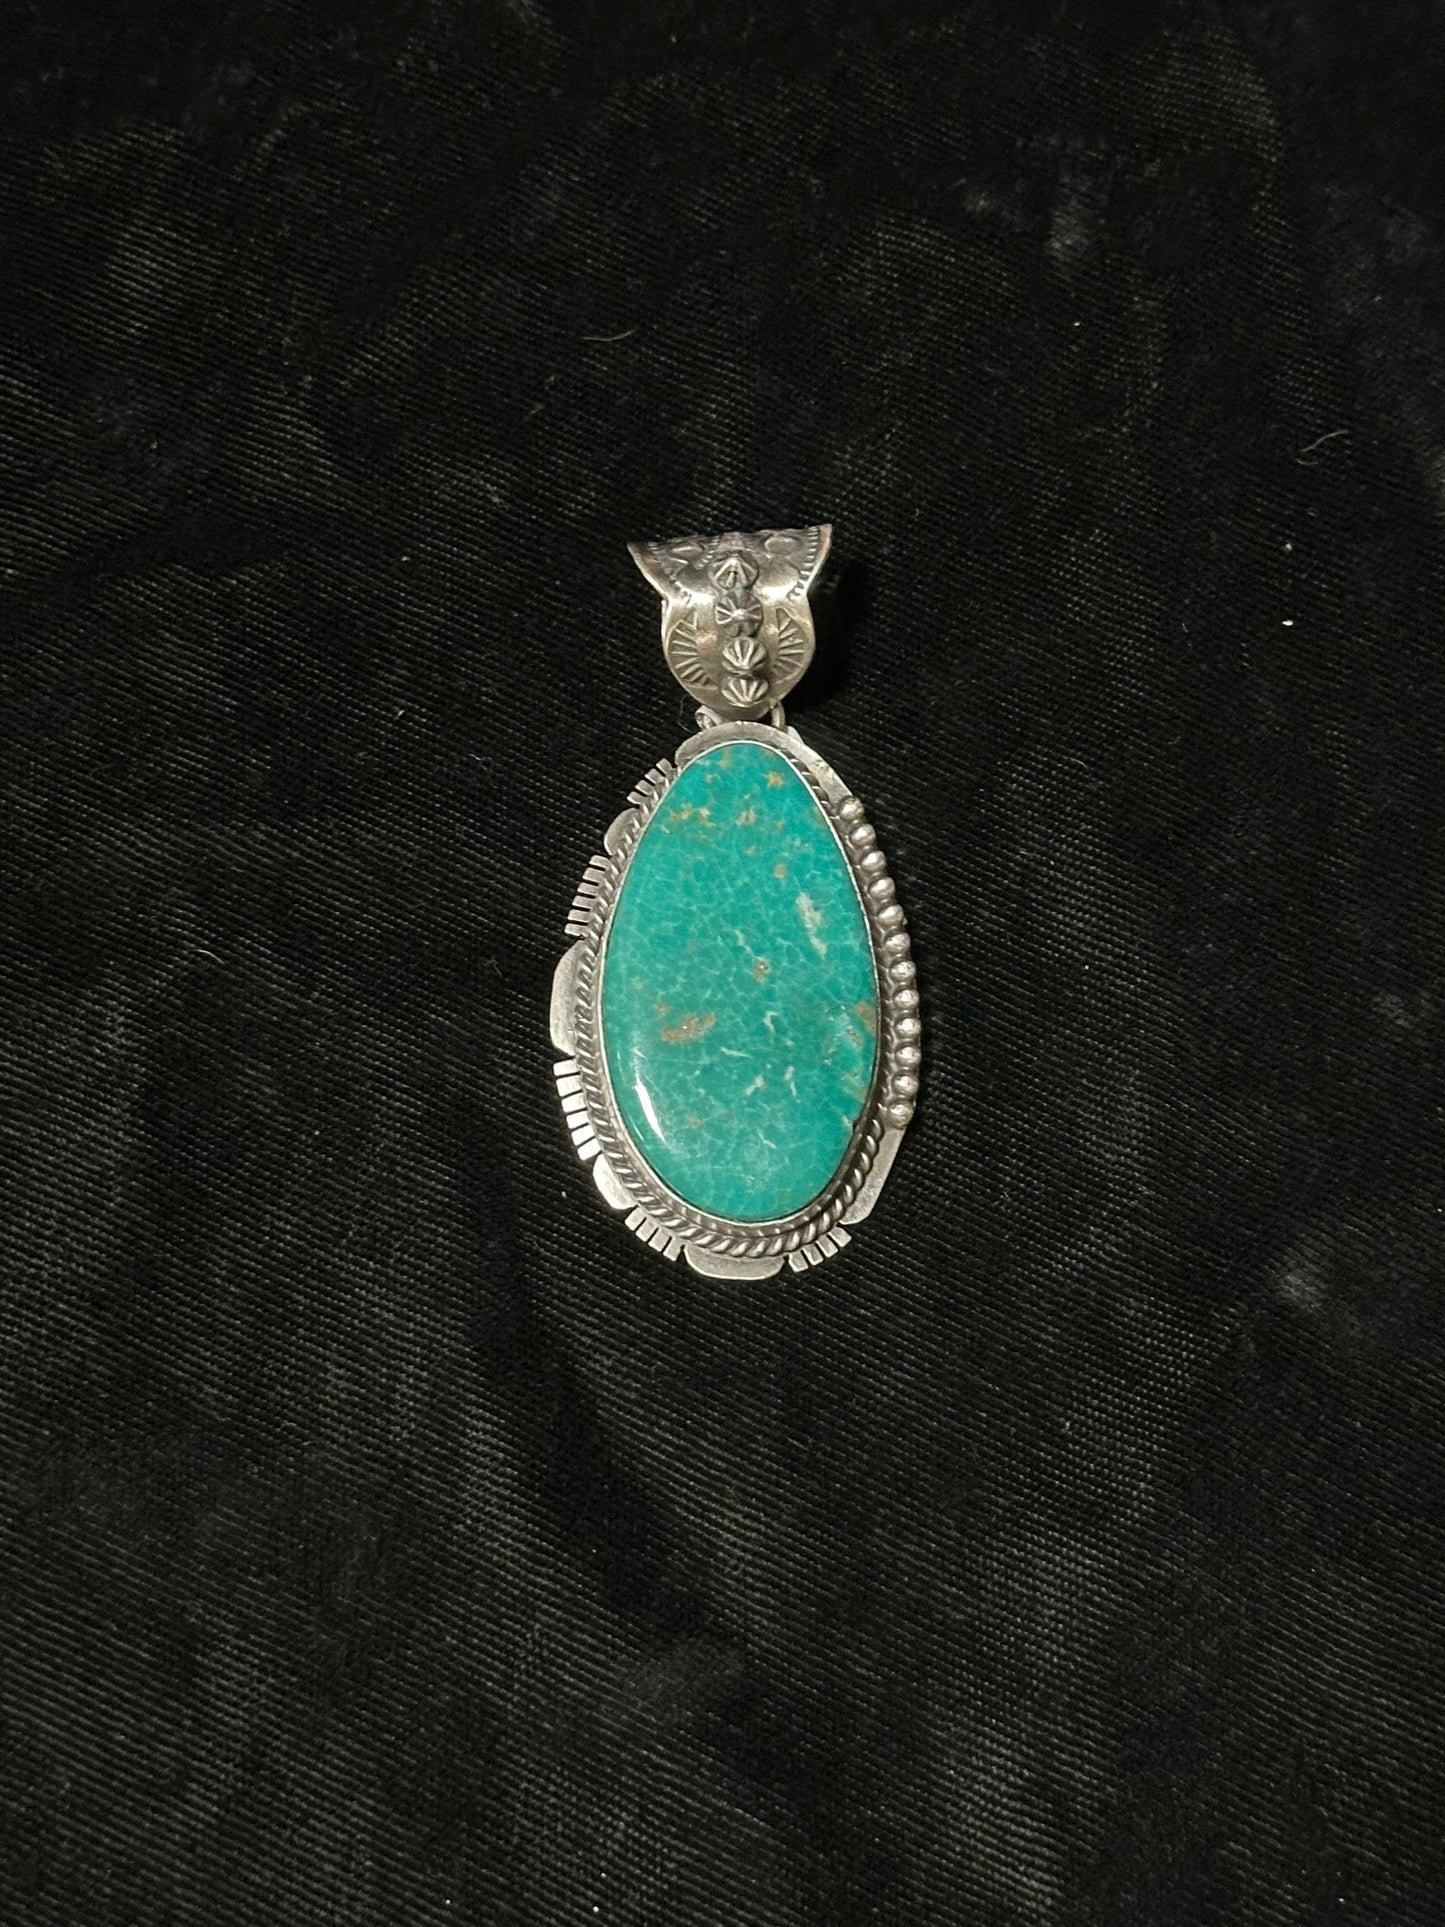 Emerald Valley Turquoise Pendant with 11mm Bale by John Nelson, Navajo